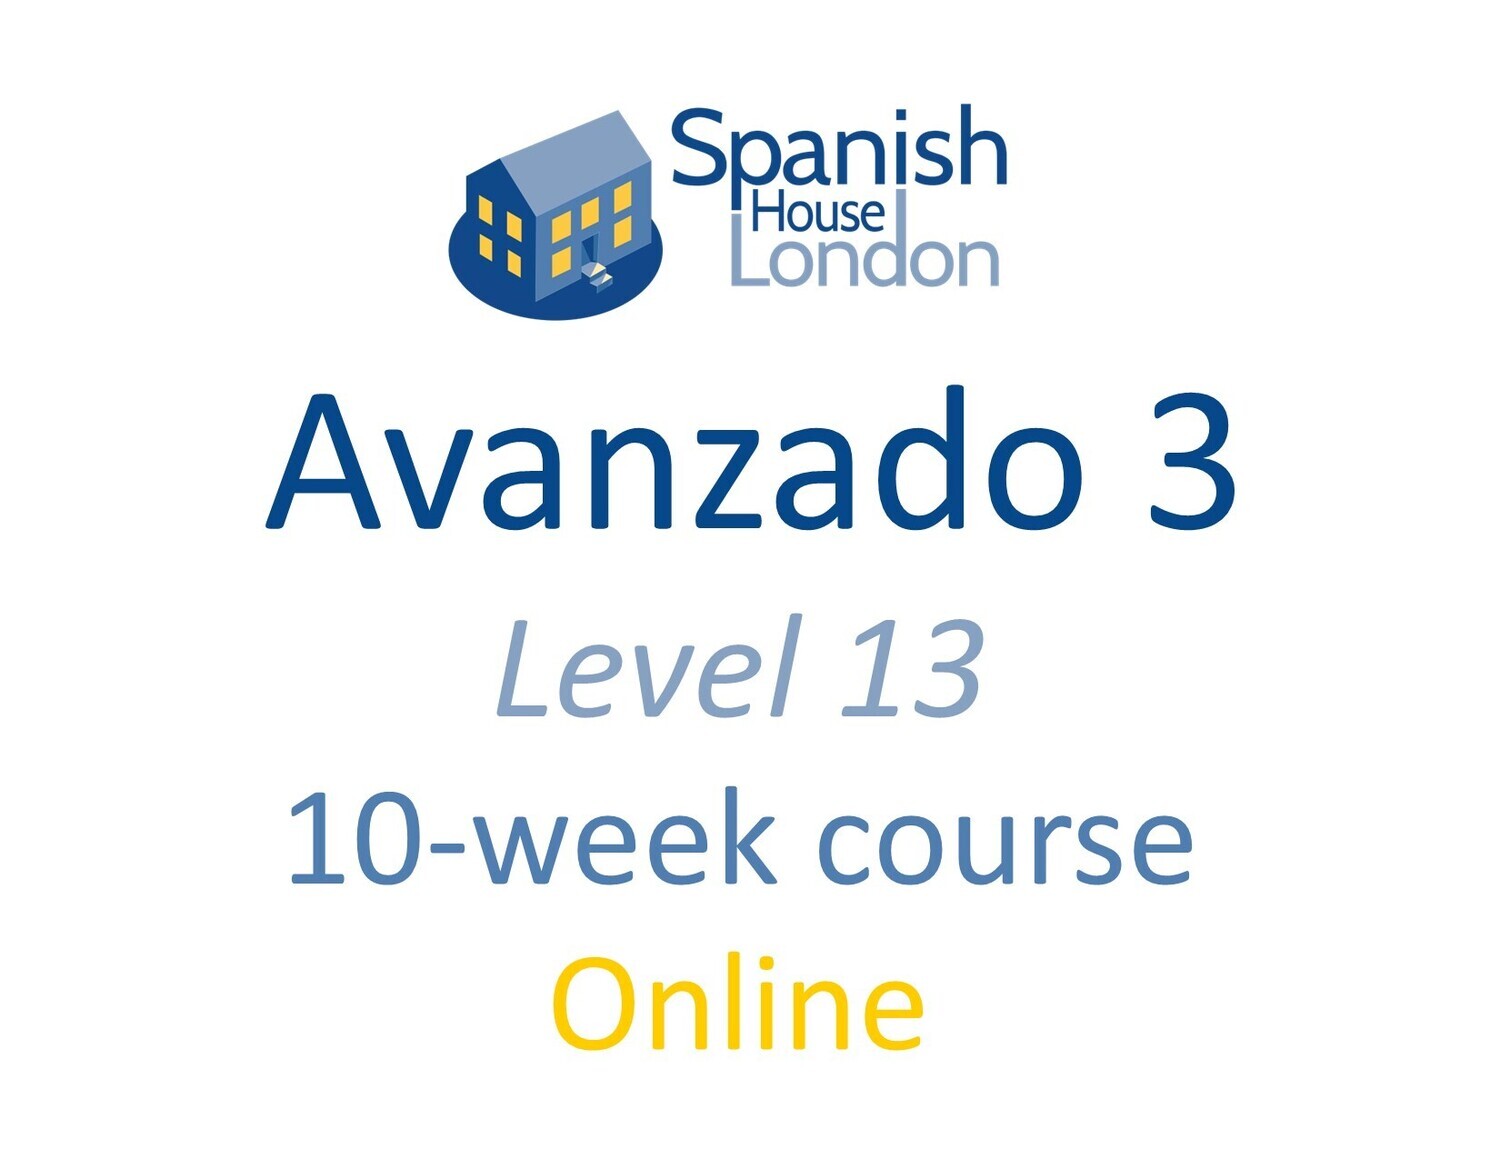 Avanzado 3 Course starting on 28th February at 6pm